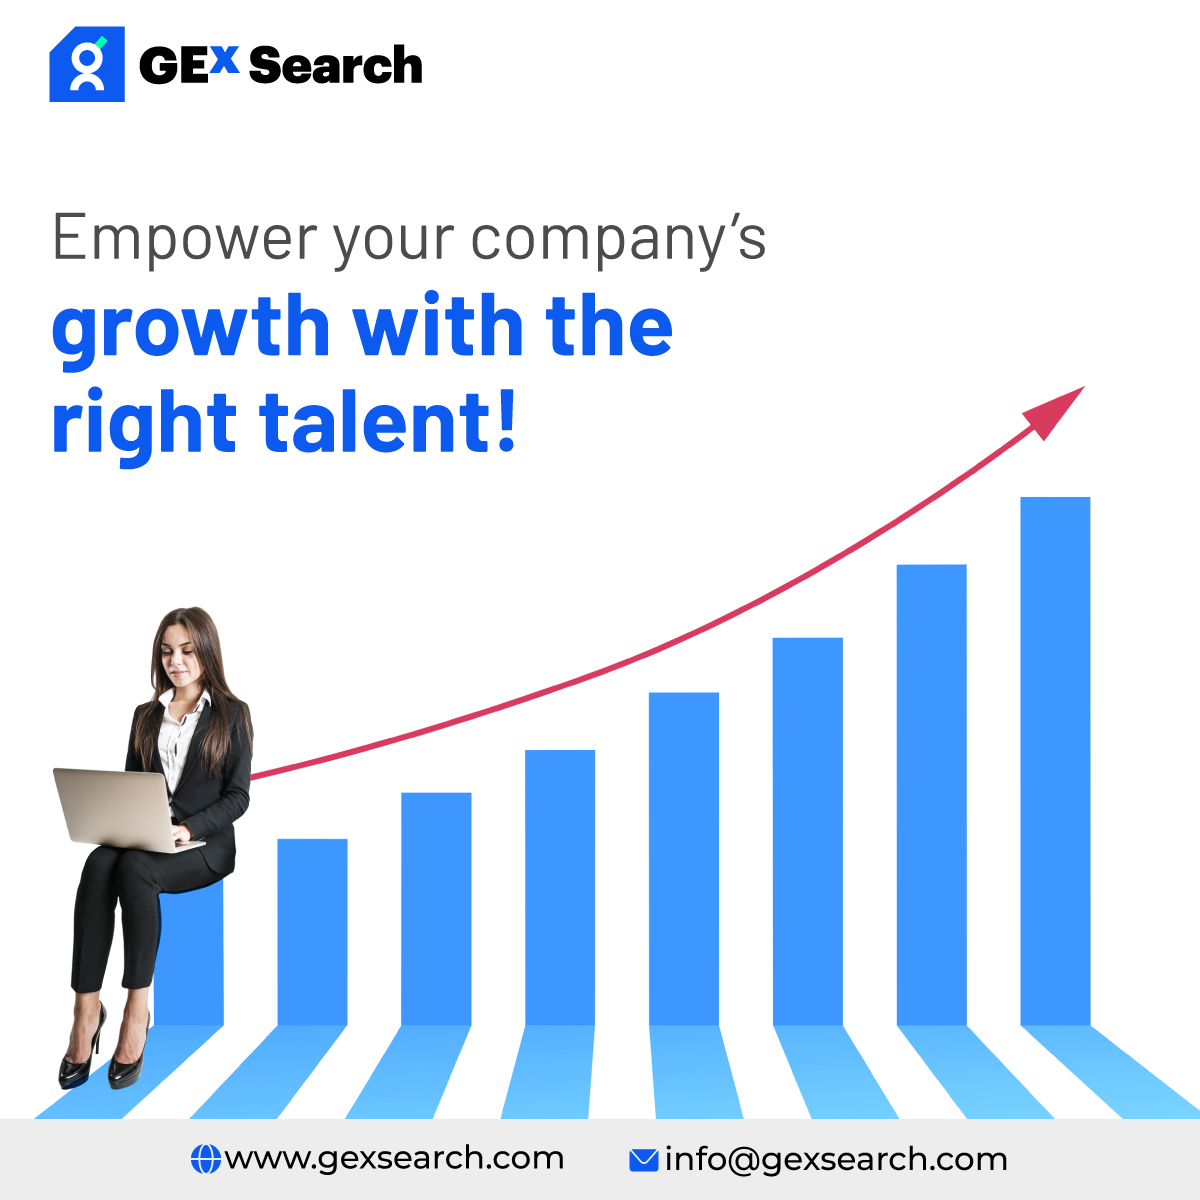 Finding the right employees is more important than finding a large number of employees. Make the best decision for your business by partnering with GEx Search
.
.
.
#bestrecruitmentcompany #empoweremployees #offshorerecuiting #globalrecruitment #Companyculture #Values #Corporate